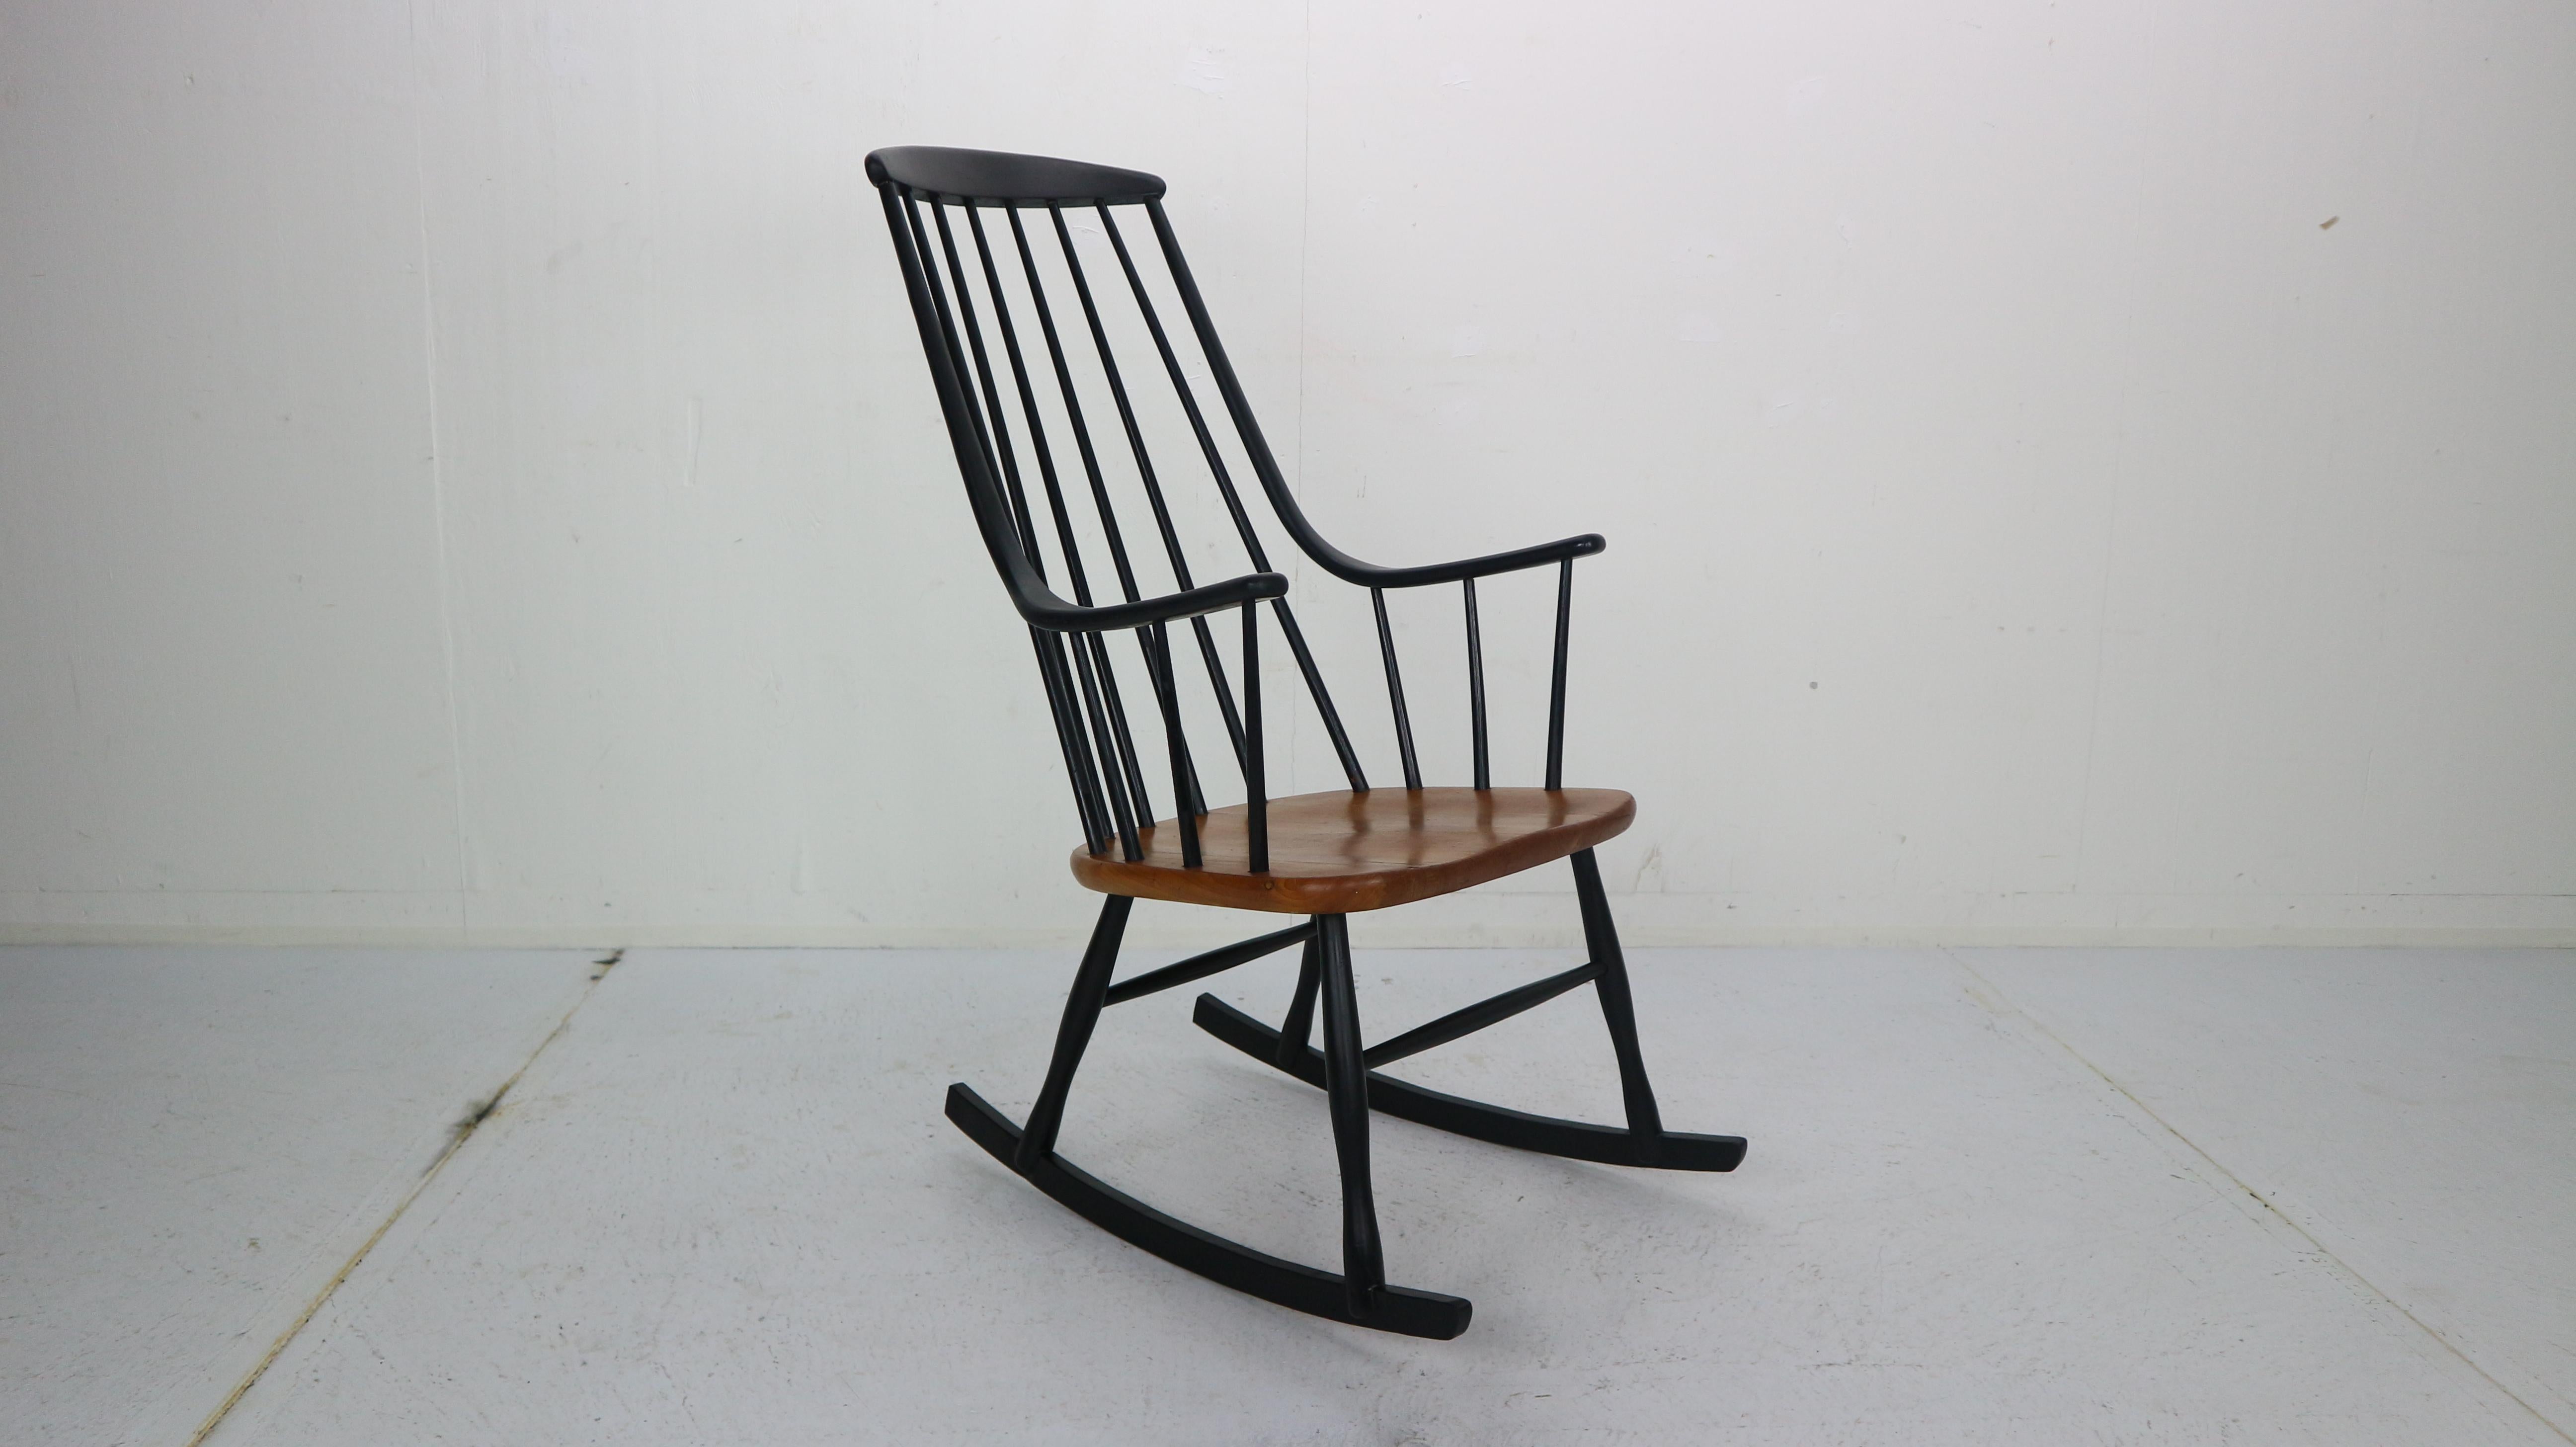 Scandinavian modern design rocking chair designed by Lena Larsoon and manufactured by Nesto in 1960s period, Sweden.
Model name: Grandessa, made of- teak wood.
  